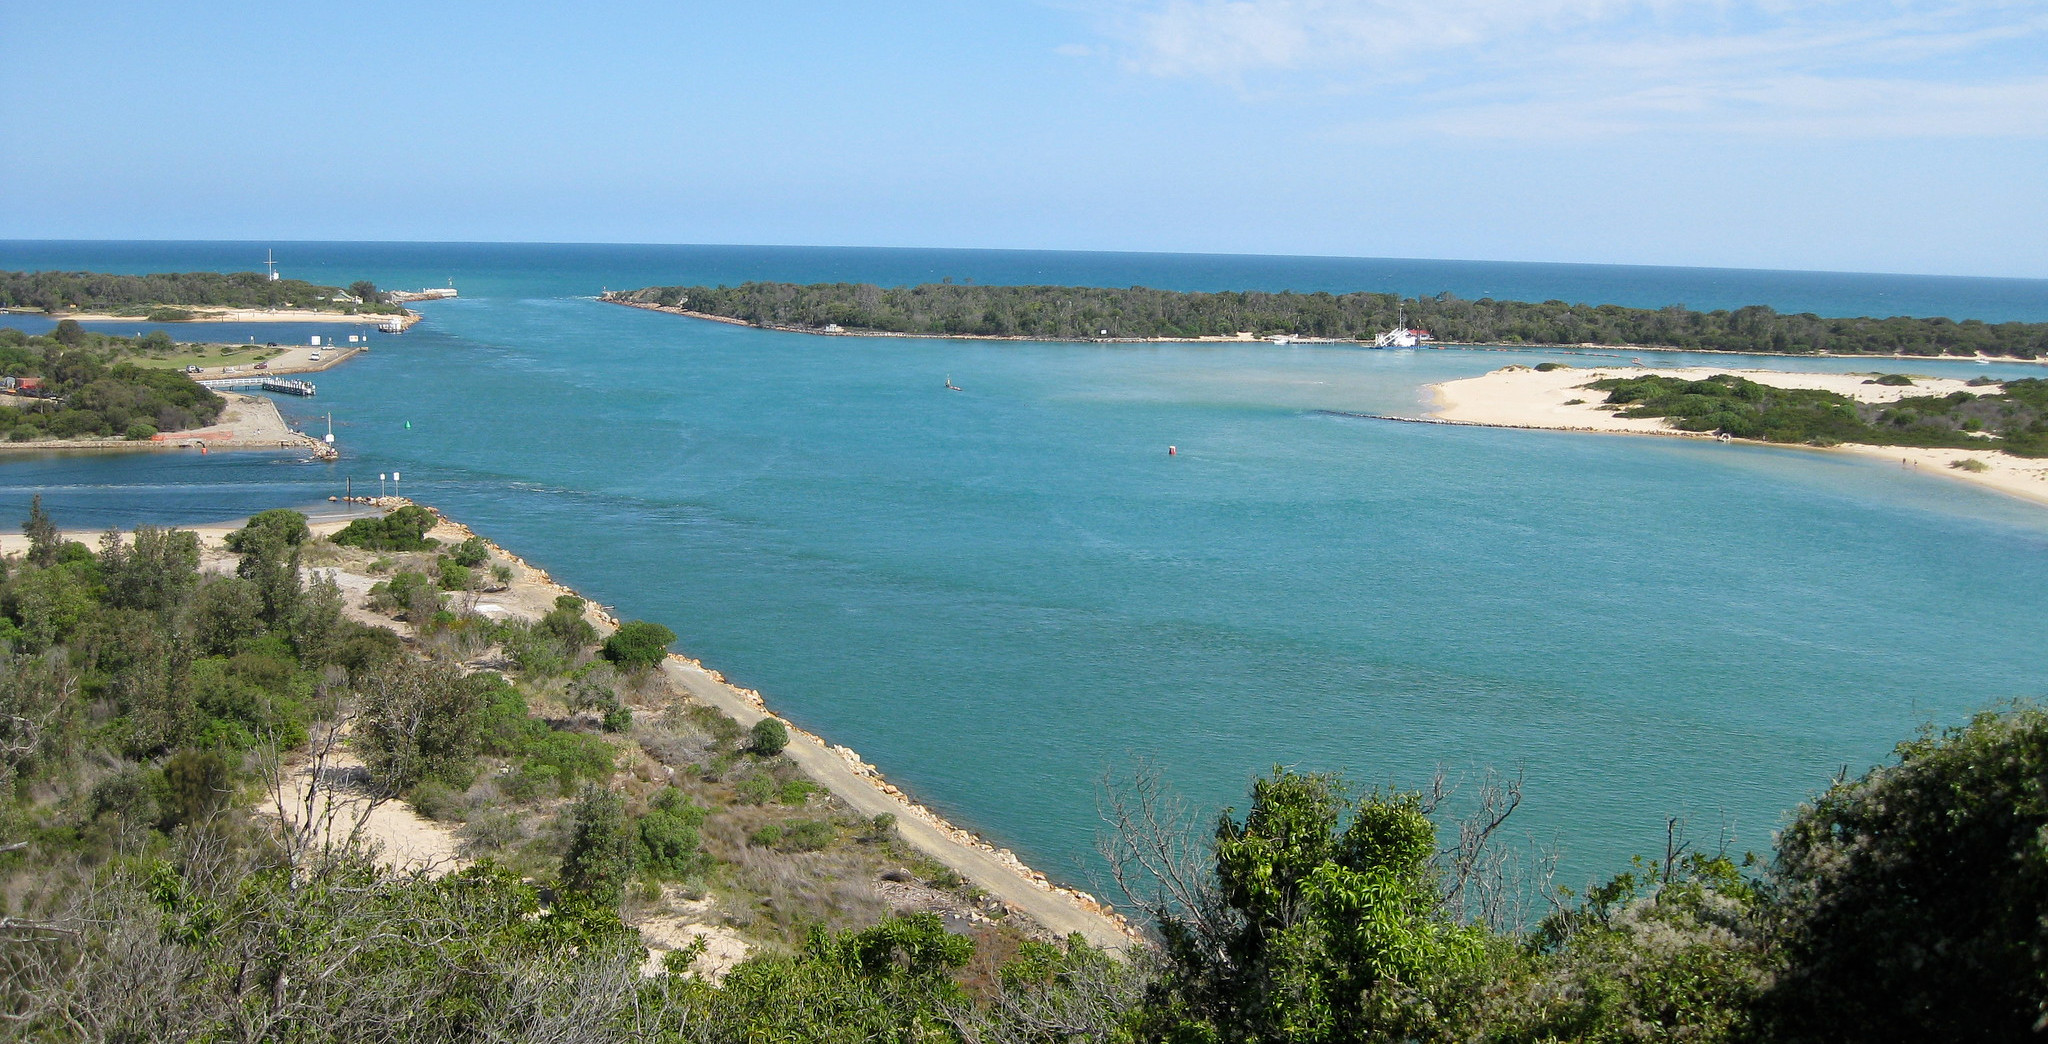 Lakes Entrance is one of Victoria's great fishing regions. Photo by Phil Whitehouse/flickr